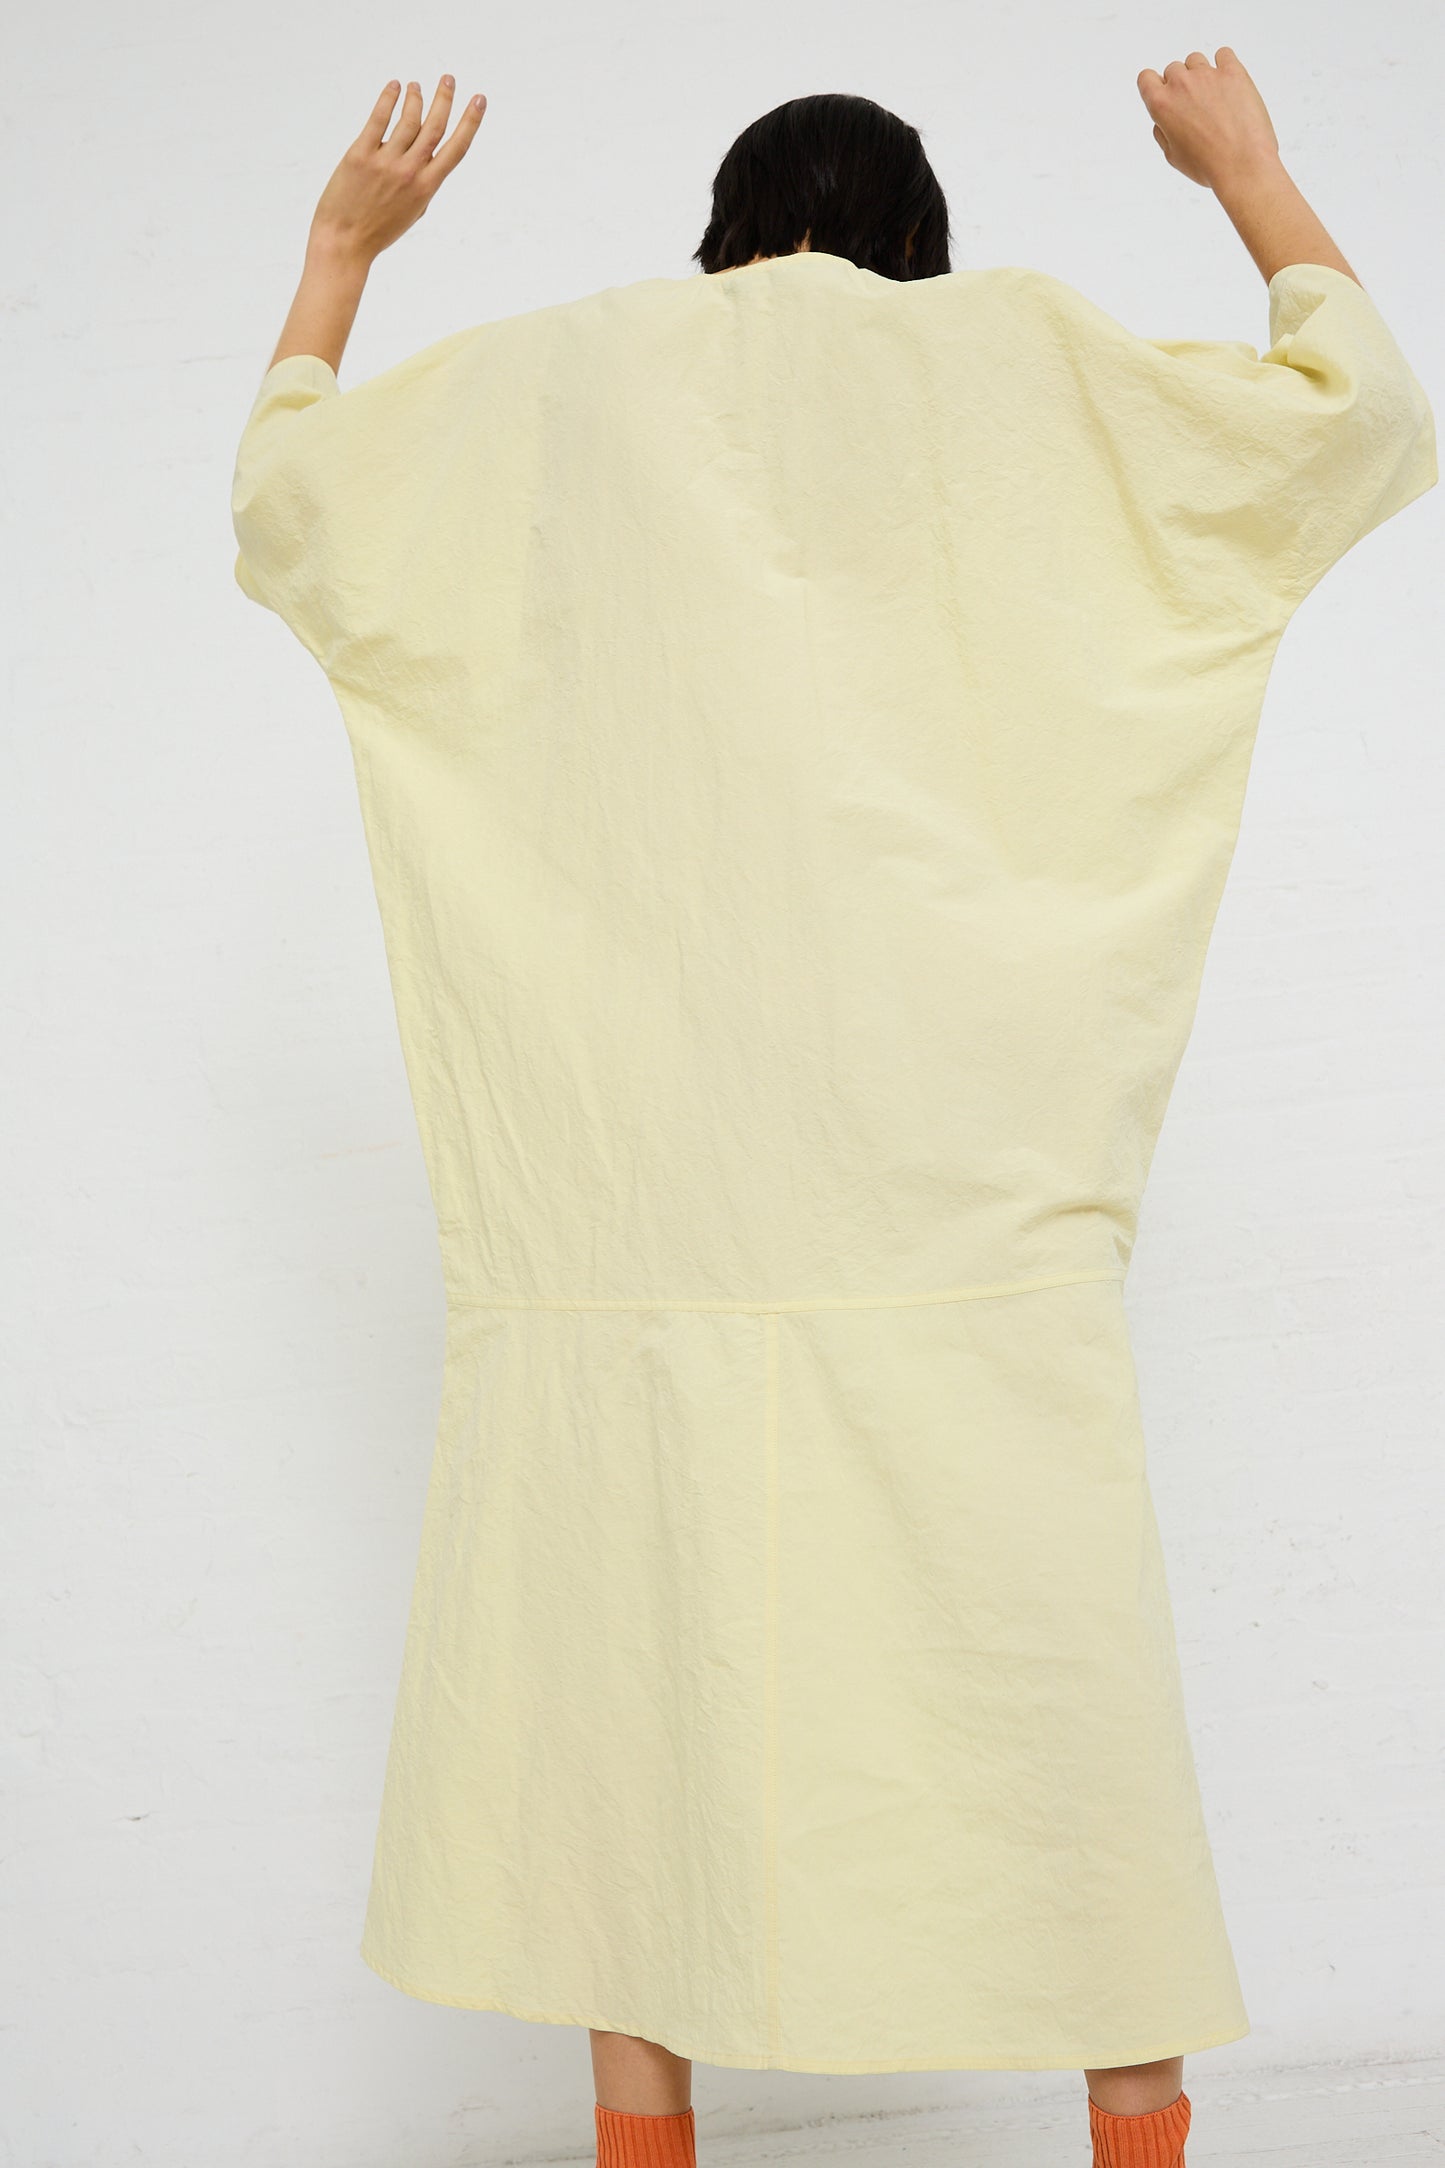 Person standing with their back to the camera, raising their arms, wearing a pale yellow oversized Linen Cotton Delfi Dress in Pastis by Sofie D'Hoore.